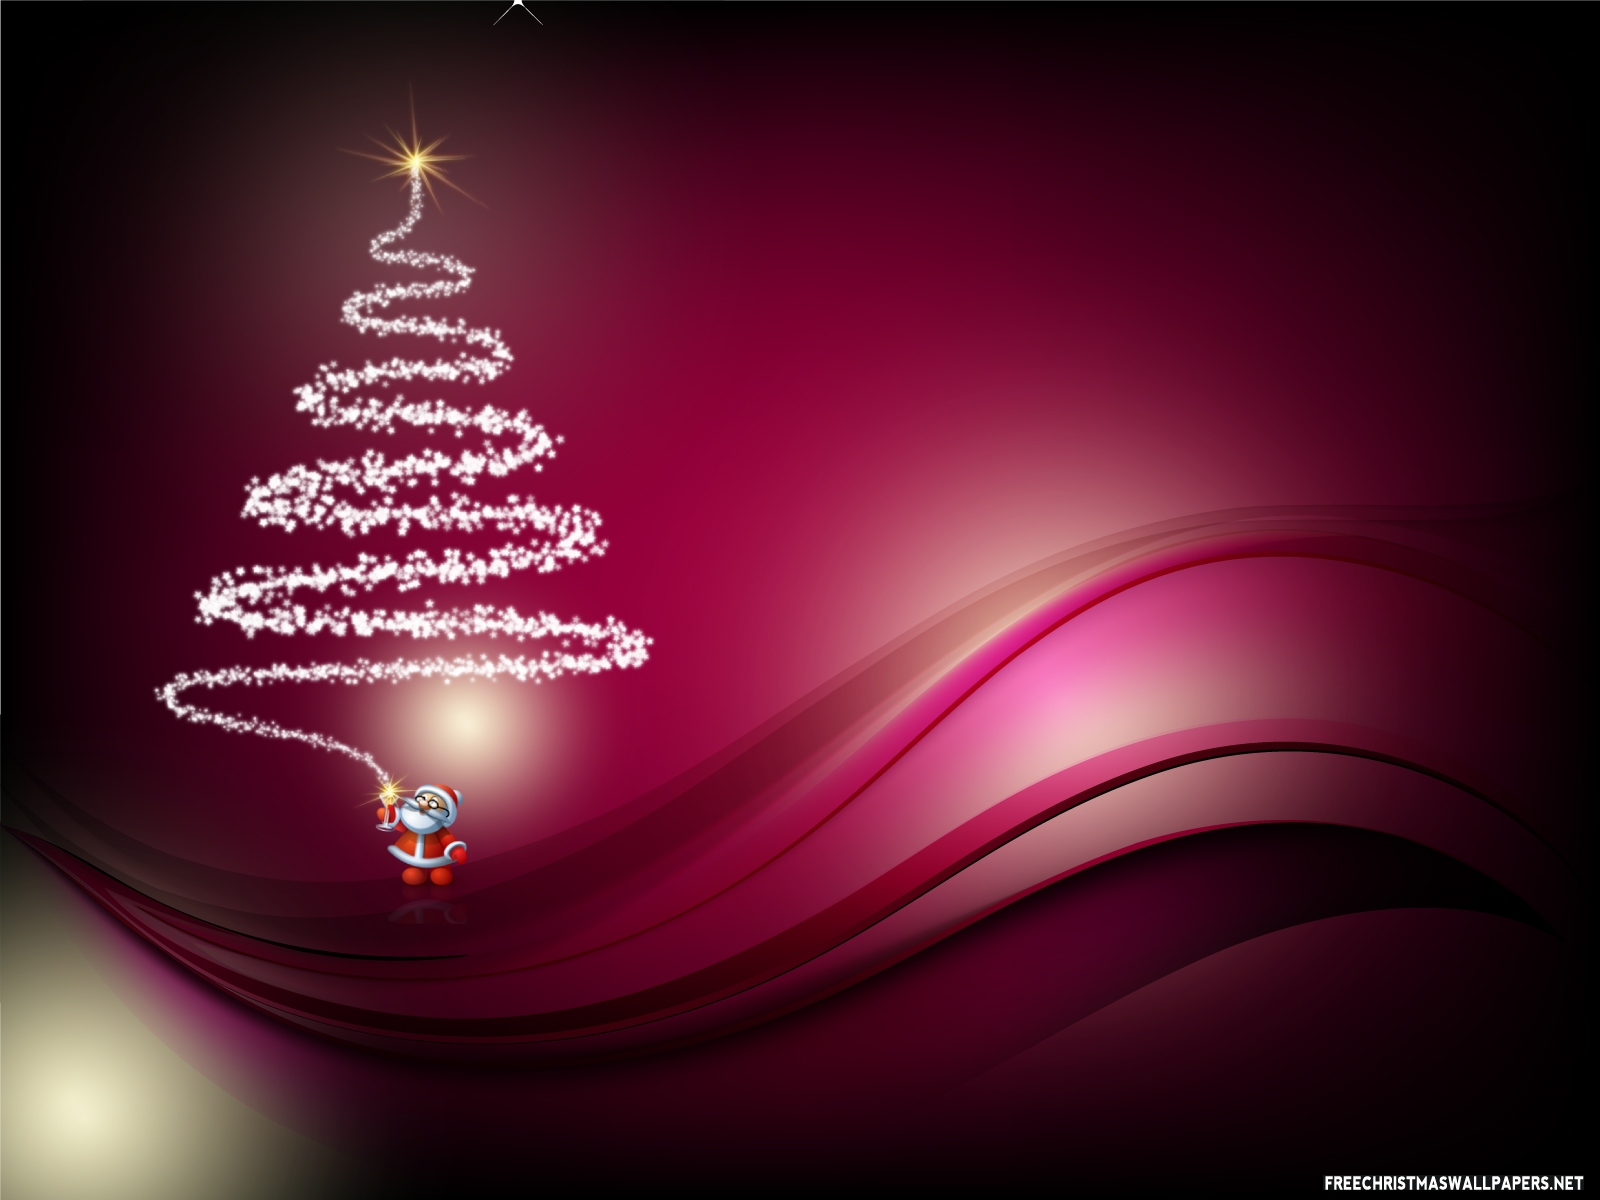 Related - Wesolych Swiat Frohe Weihnachten , HD Wallpaper & Backgrounds